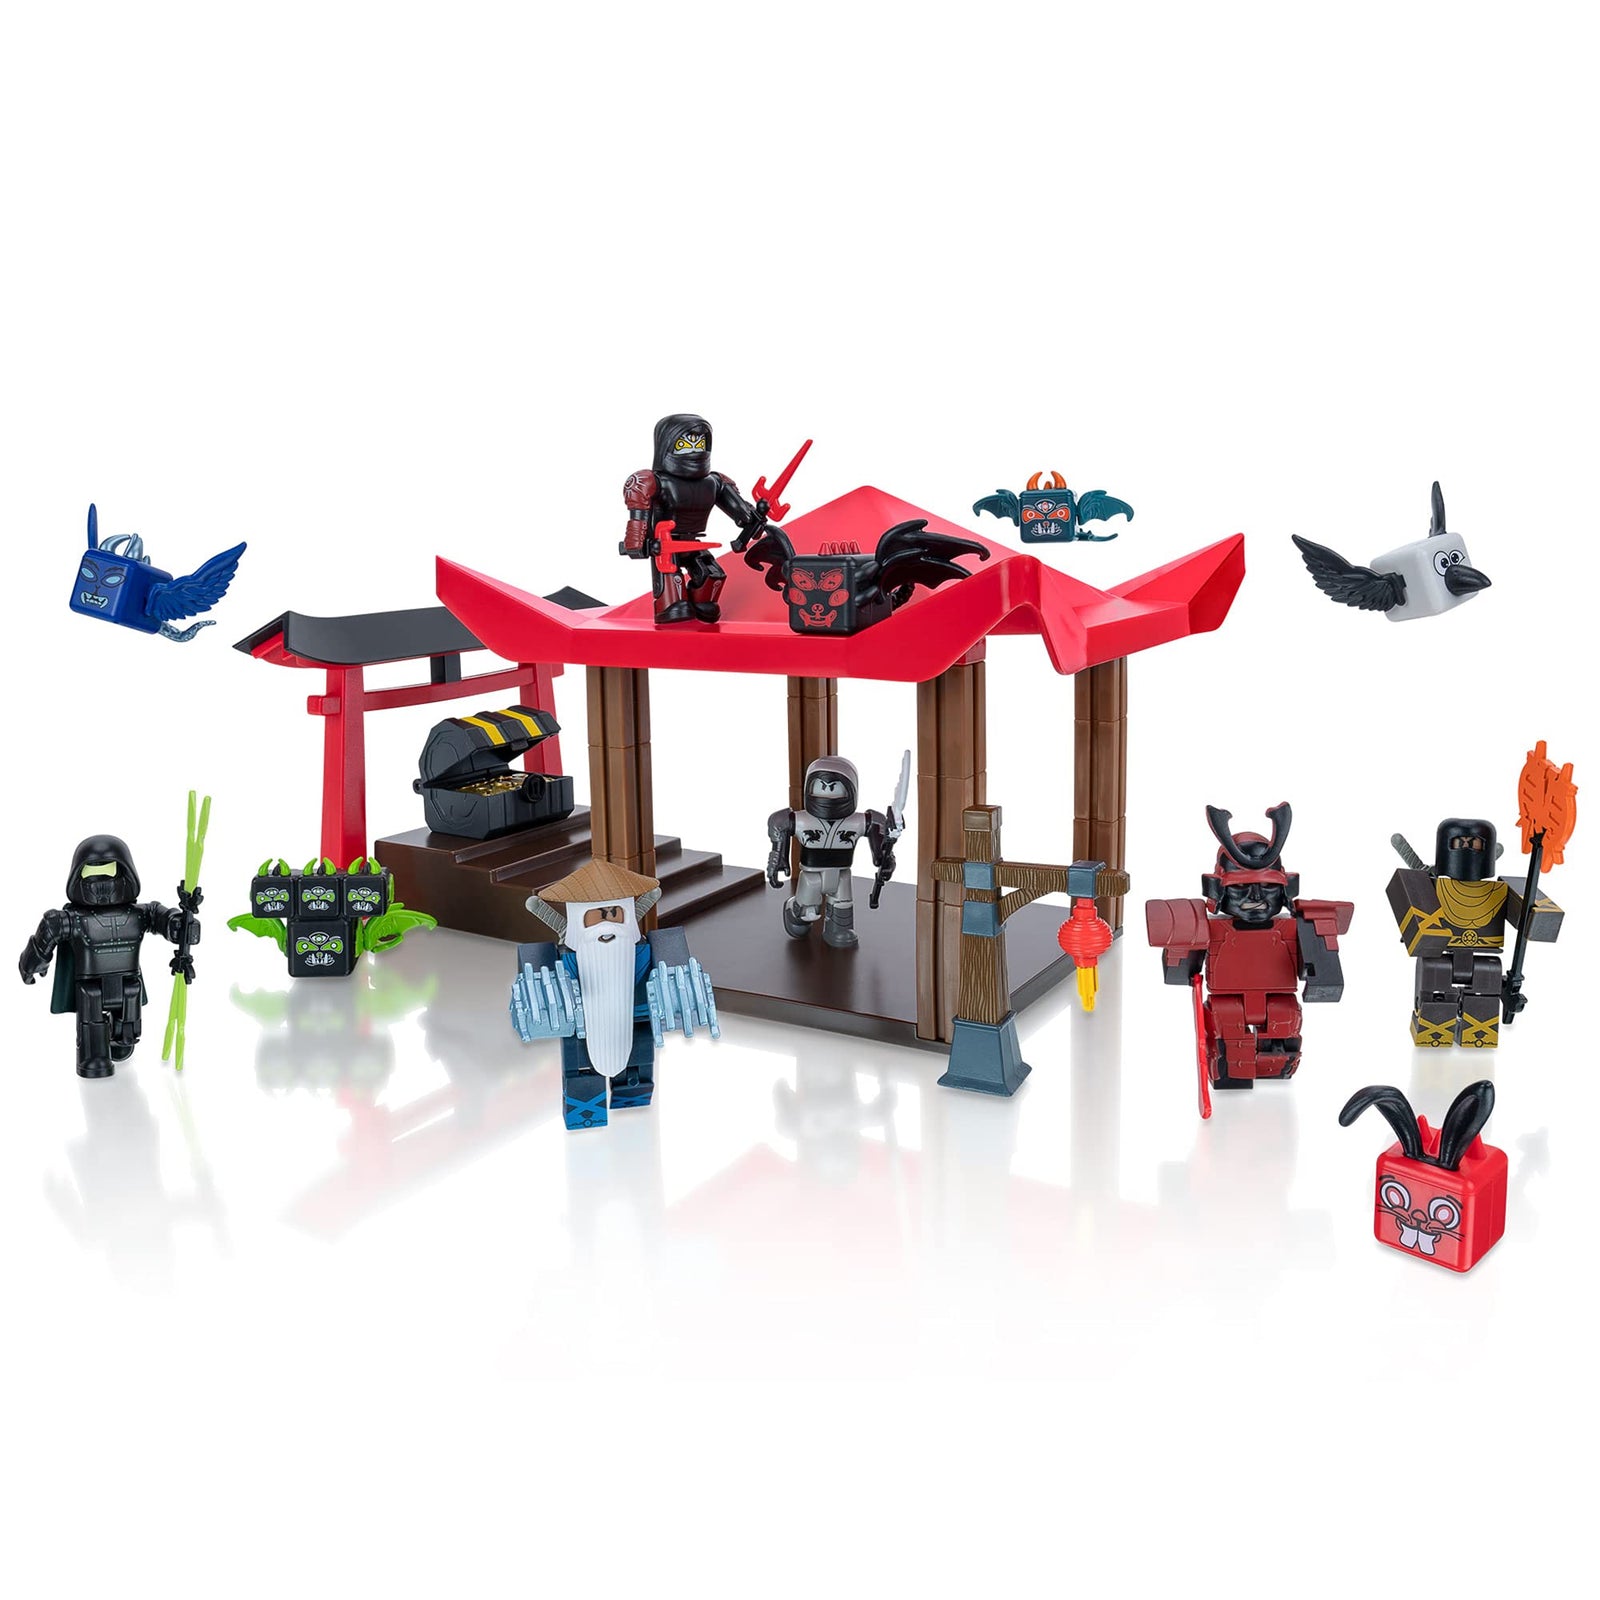 Roblox Action Collection - Ninja Legends Deluxe Playset [Includes Exclusive Virtual Item]